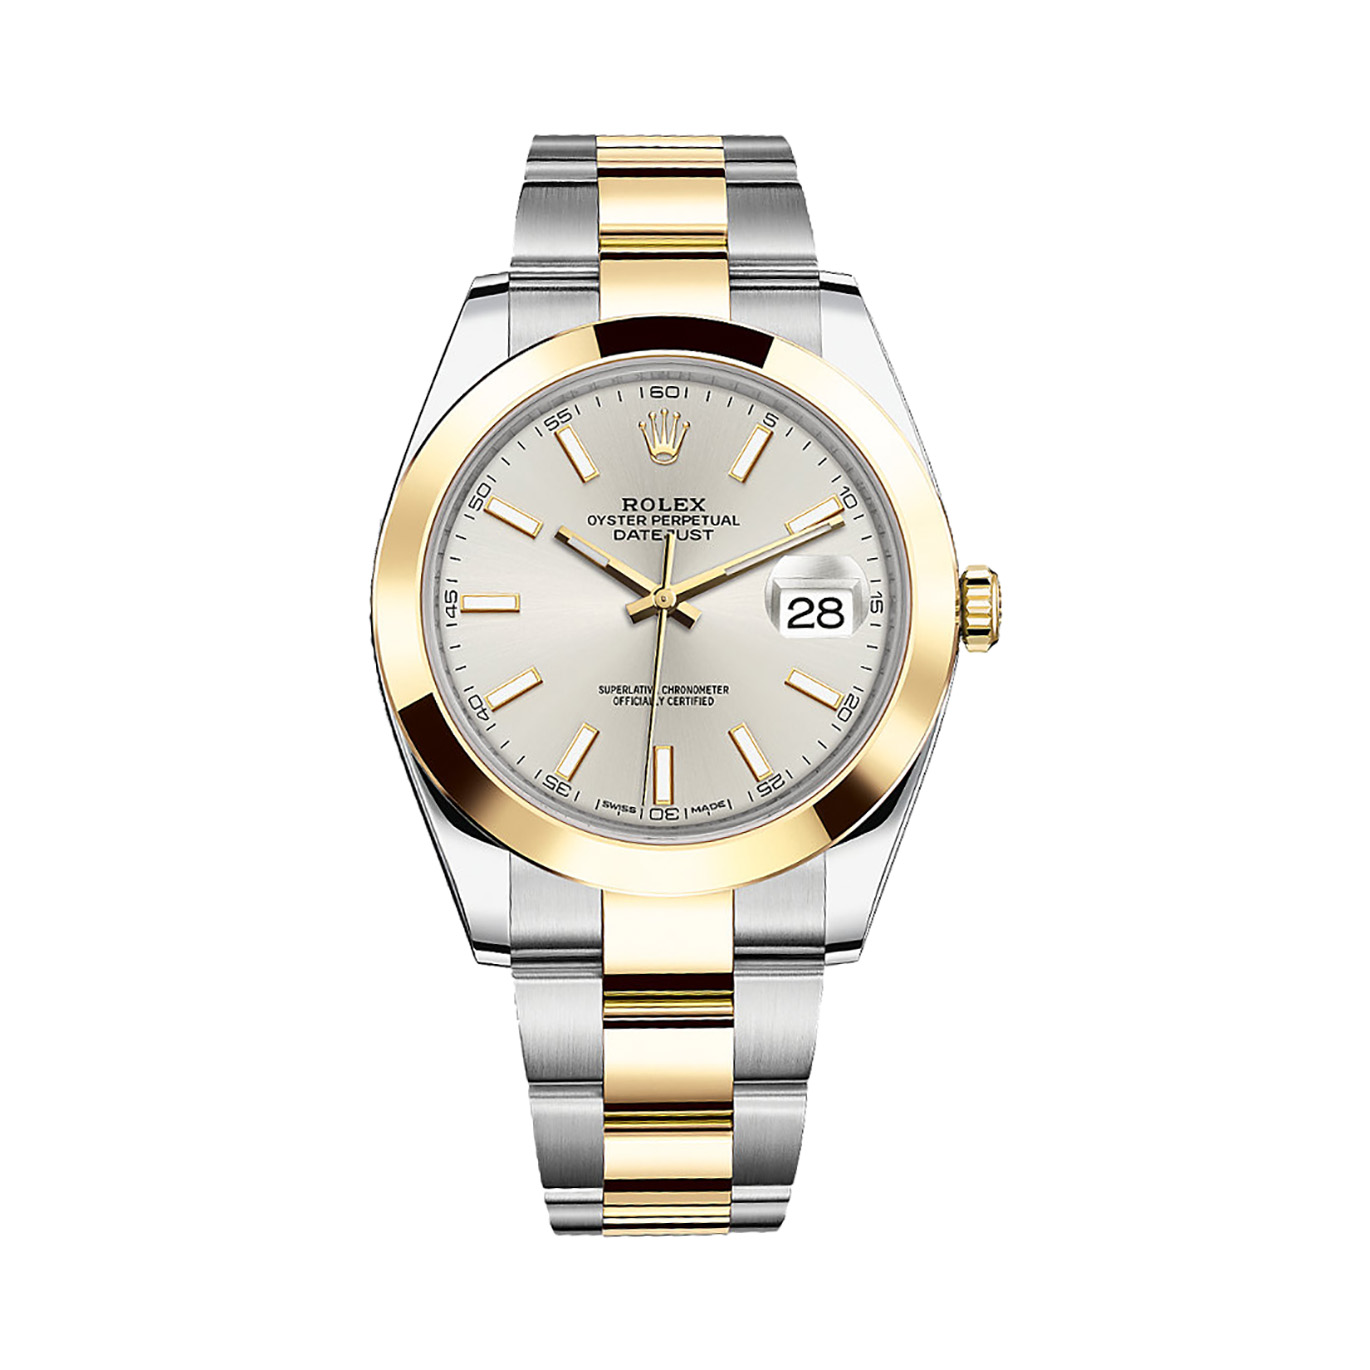 Datejust 41 126303 Gold & Stainless Steel Watch (Silver)